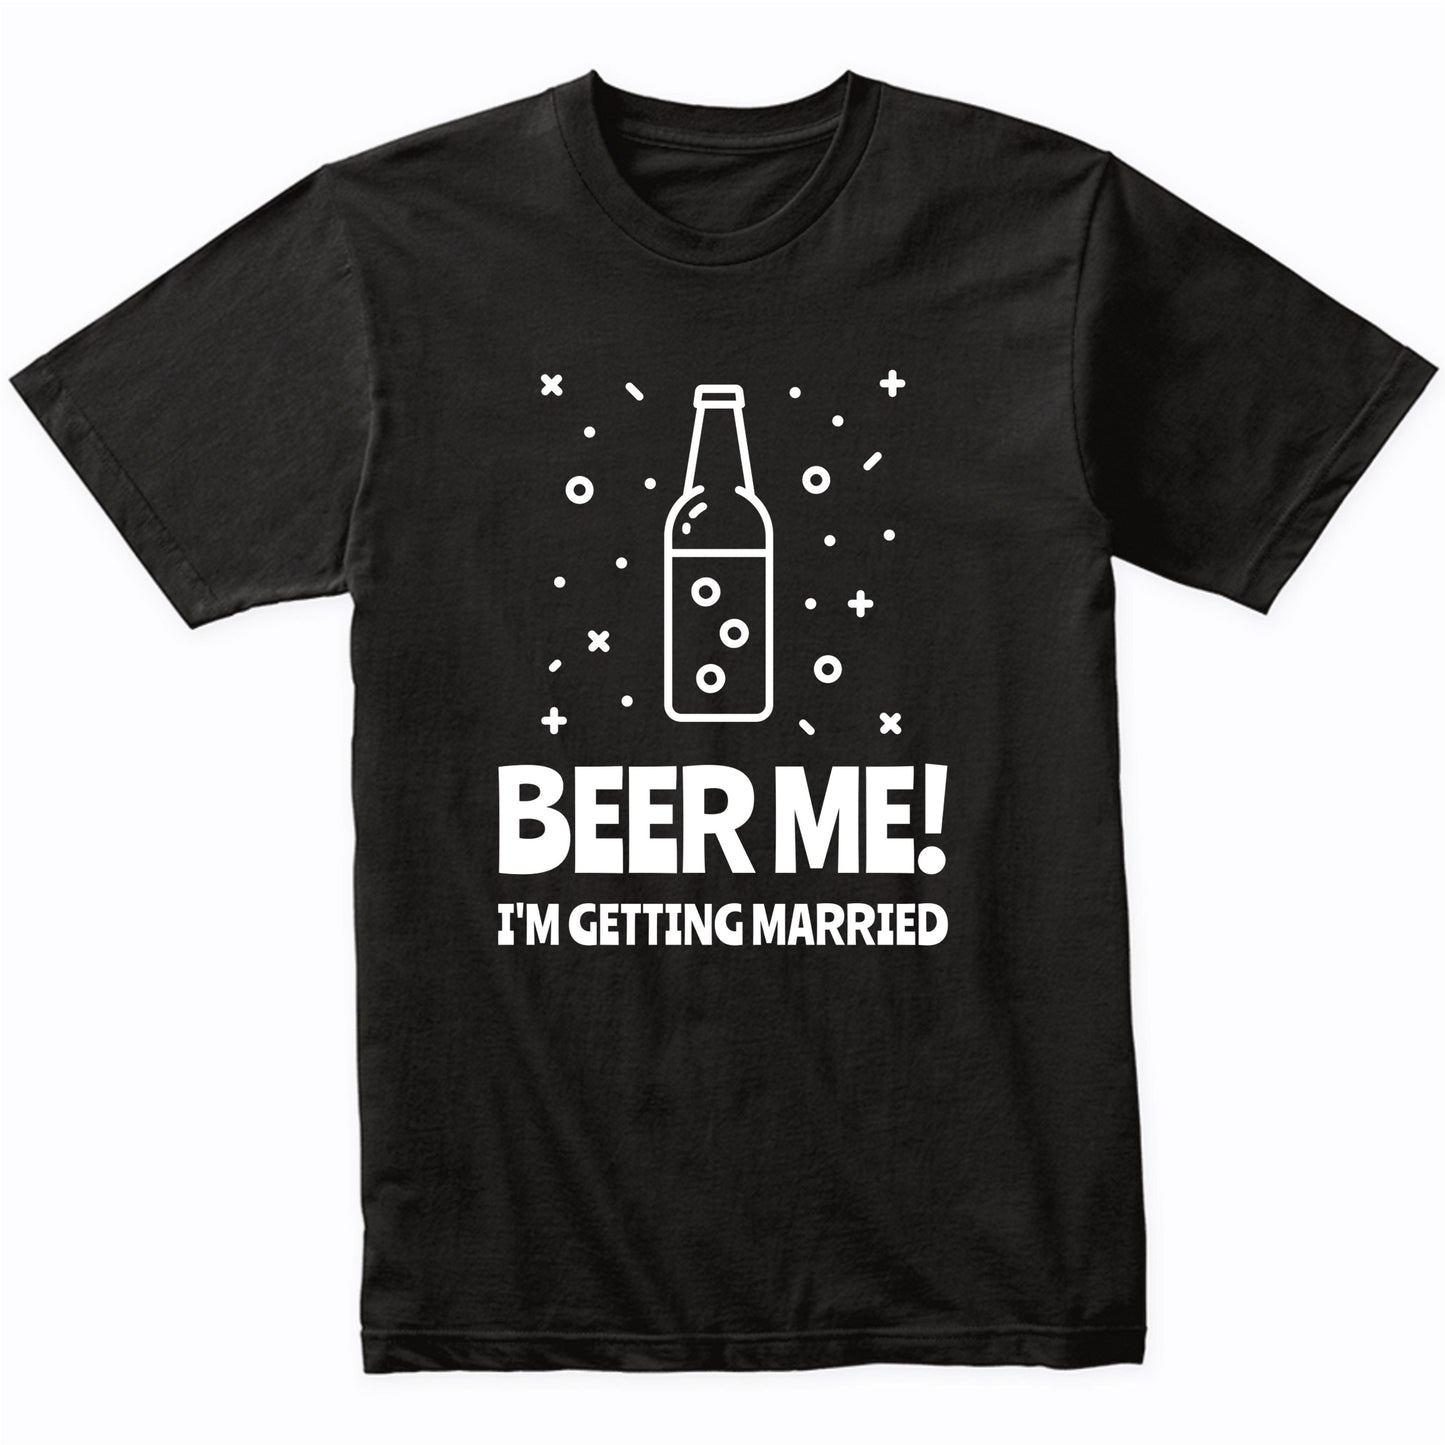 Beer Me I'm Getting Married Funny Bachelor Party Shirt